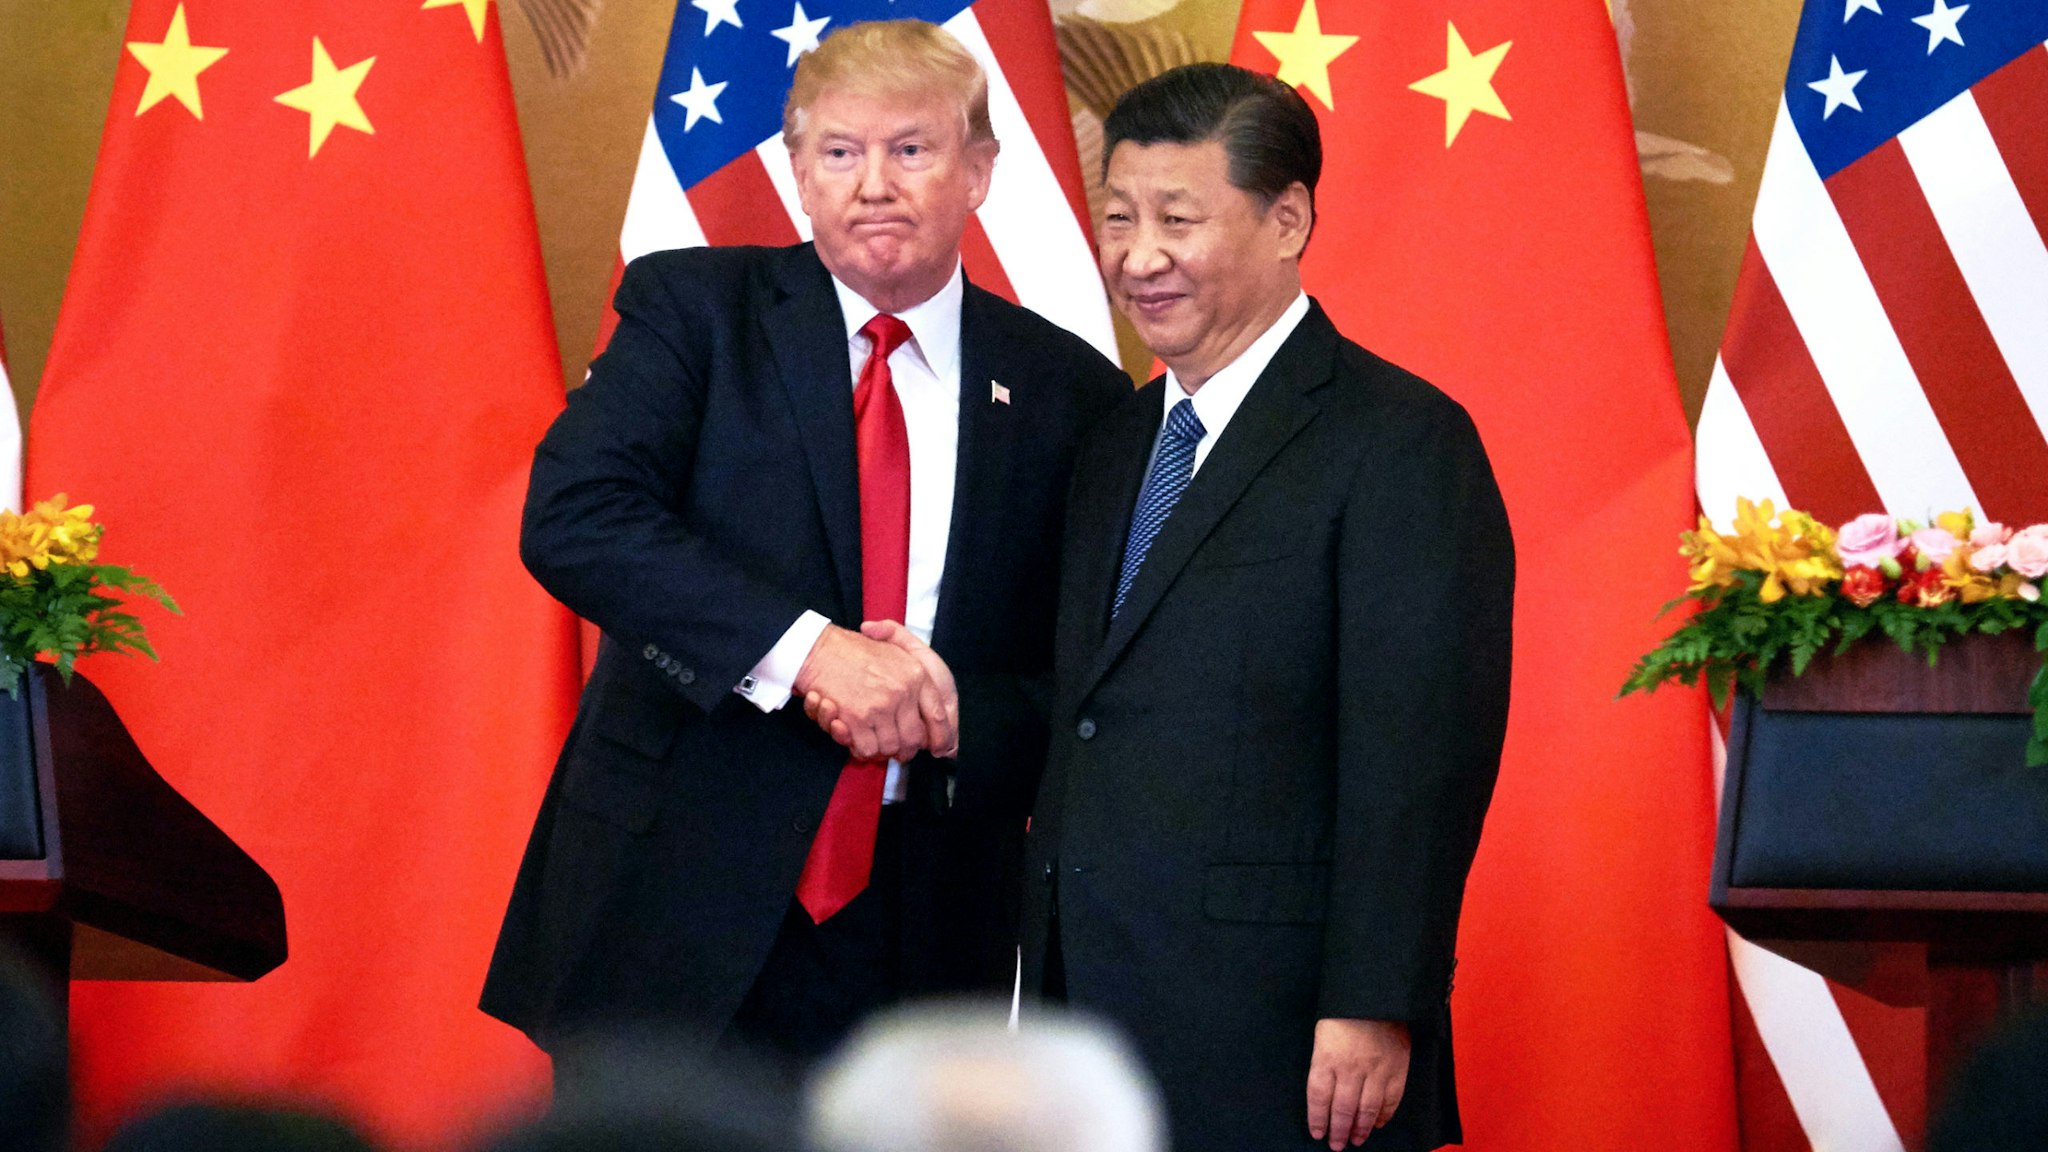 BEIJING, CHINA - NOVEMBER 9, 2017: US President Donald Trump (L) and China's President Xi Jinping shake hands at a press conference following their meeting at the Great Hall of the People in Beijing.